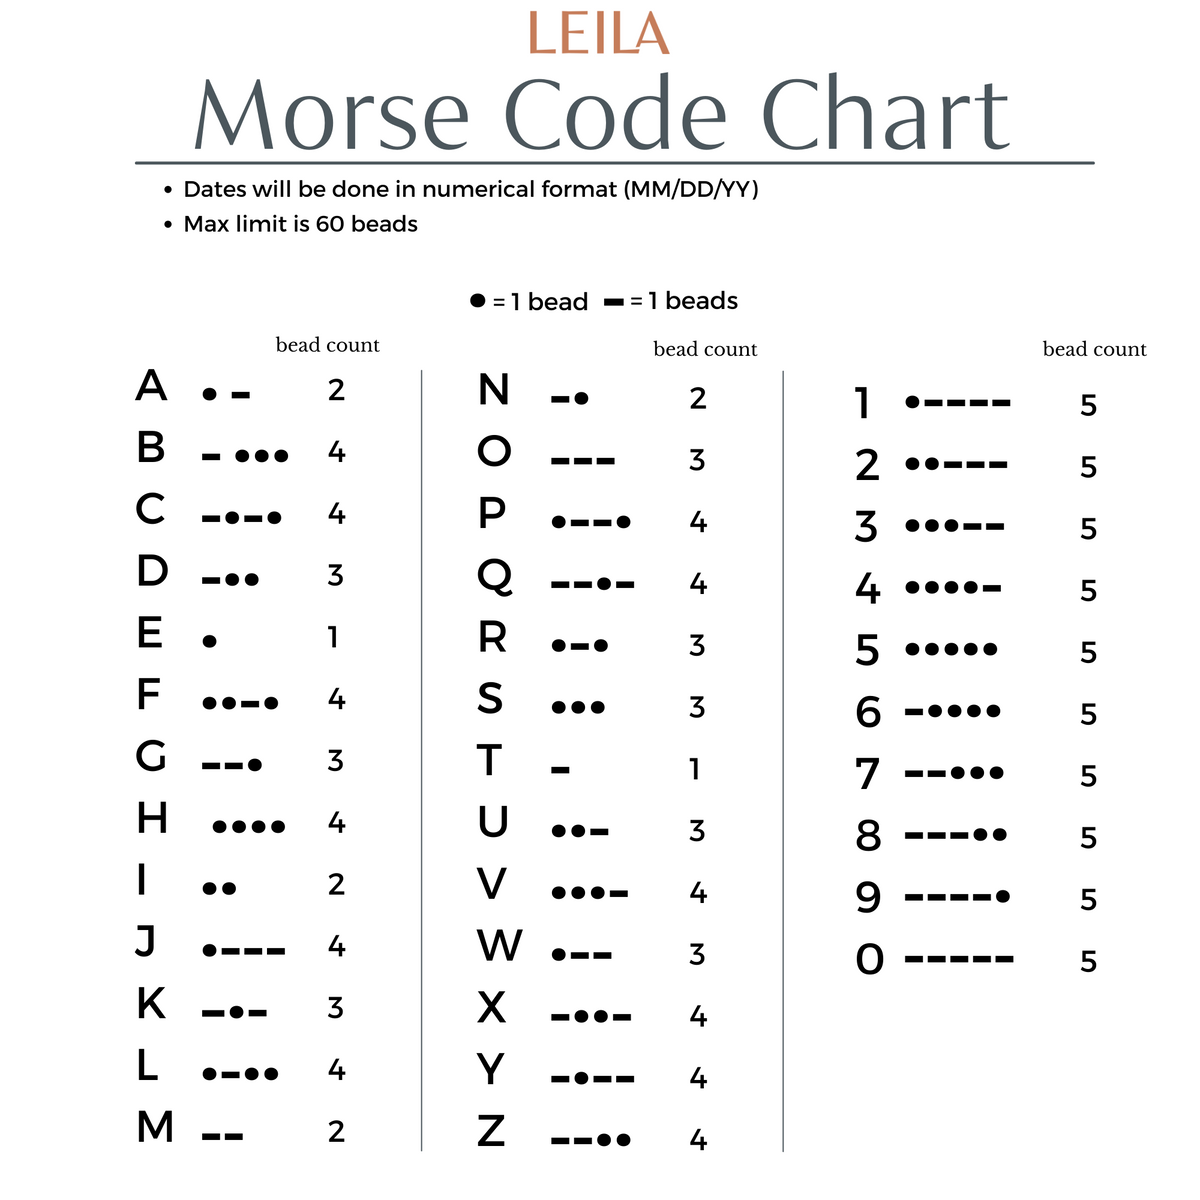 &quot;Mother of the Fucking Year&quot; Morse Code